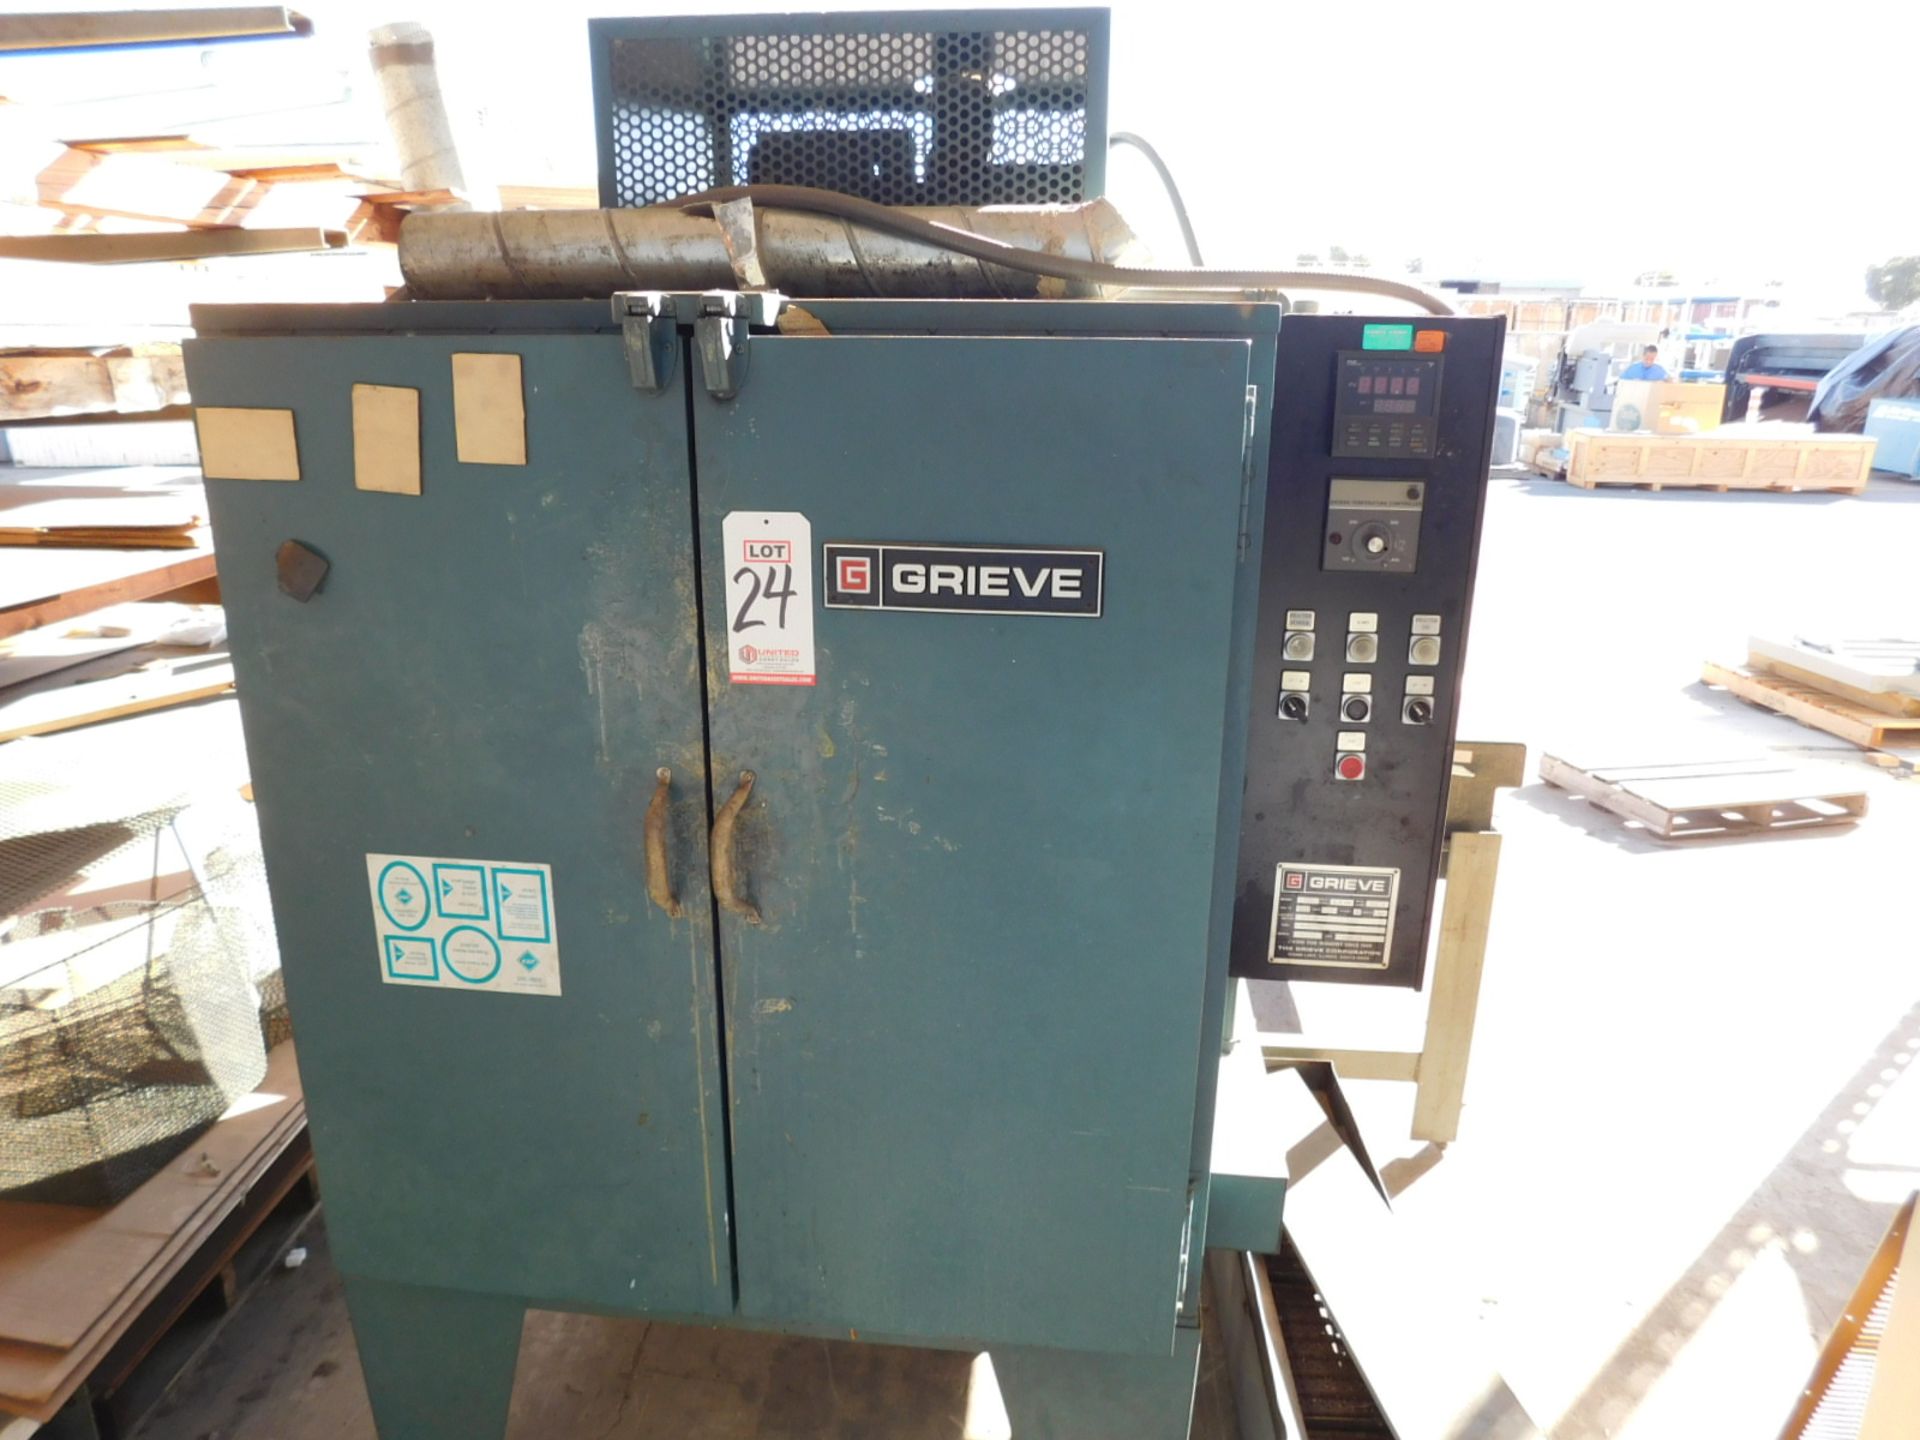 GRIEVE MODEL 333 OVEN, ELECTRIC, 350°F, S/N 311253